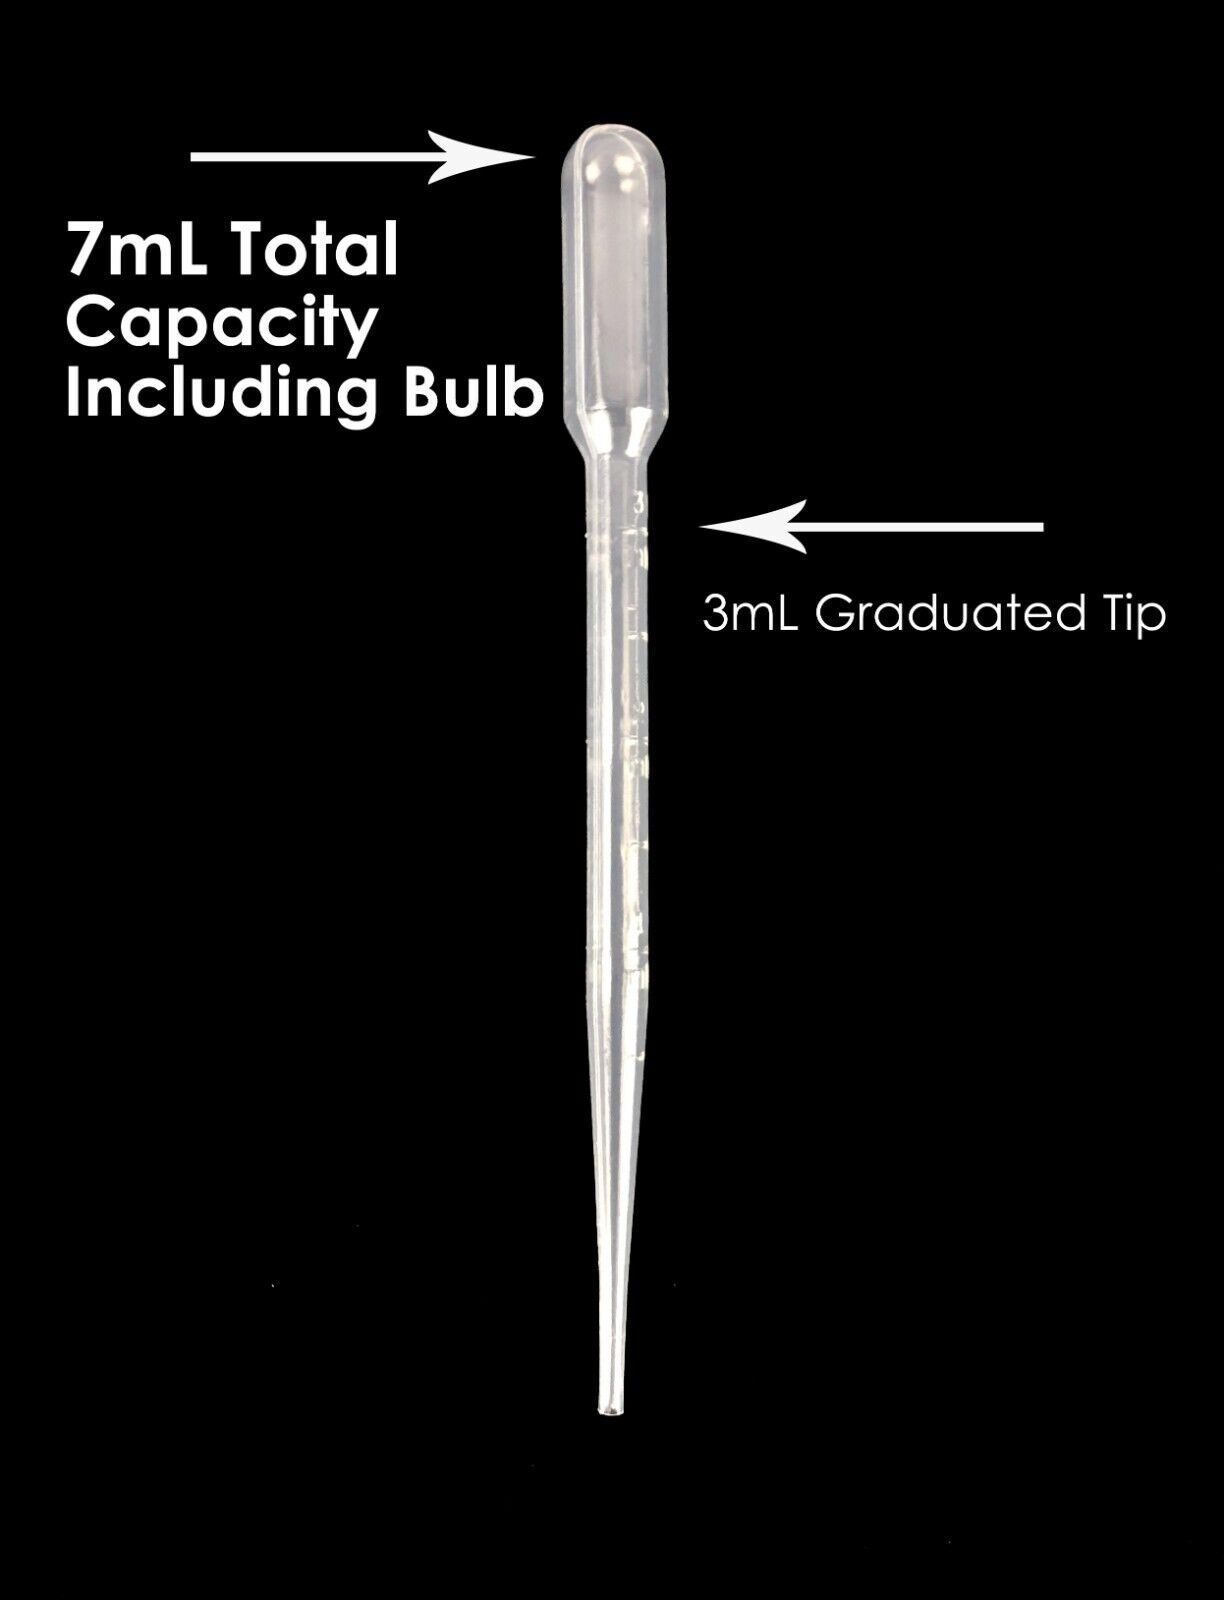 7mL Total Capacity including Bulb Graduated to 3mL